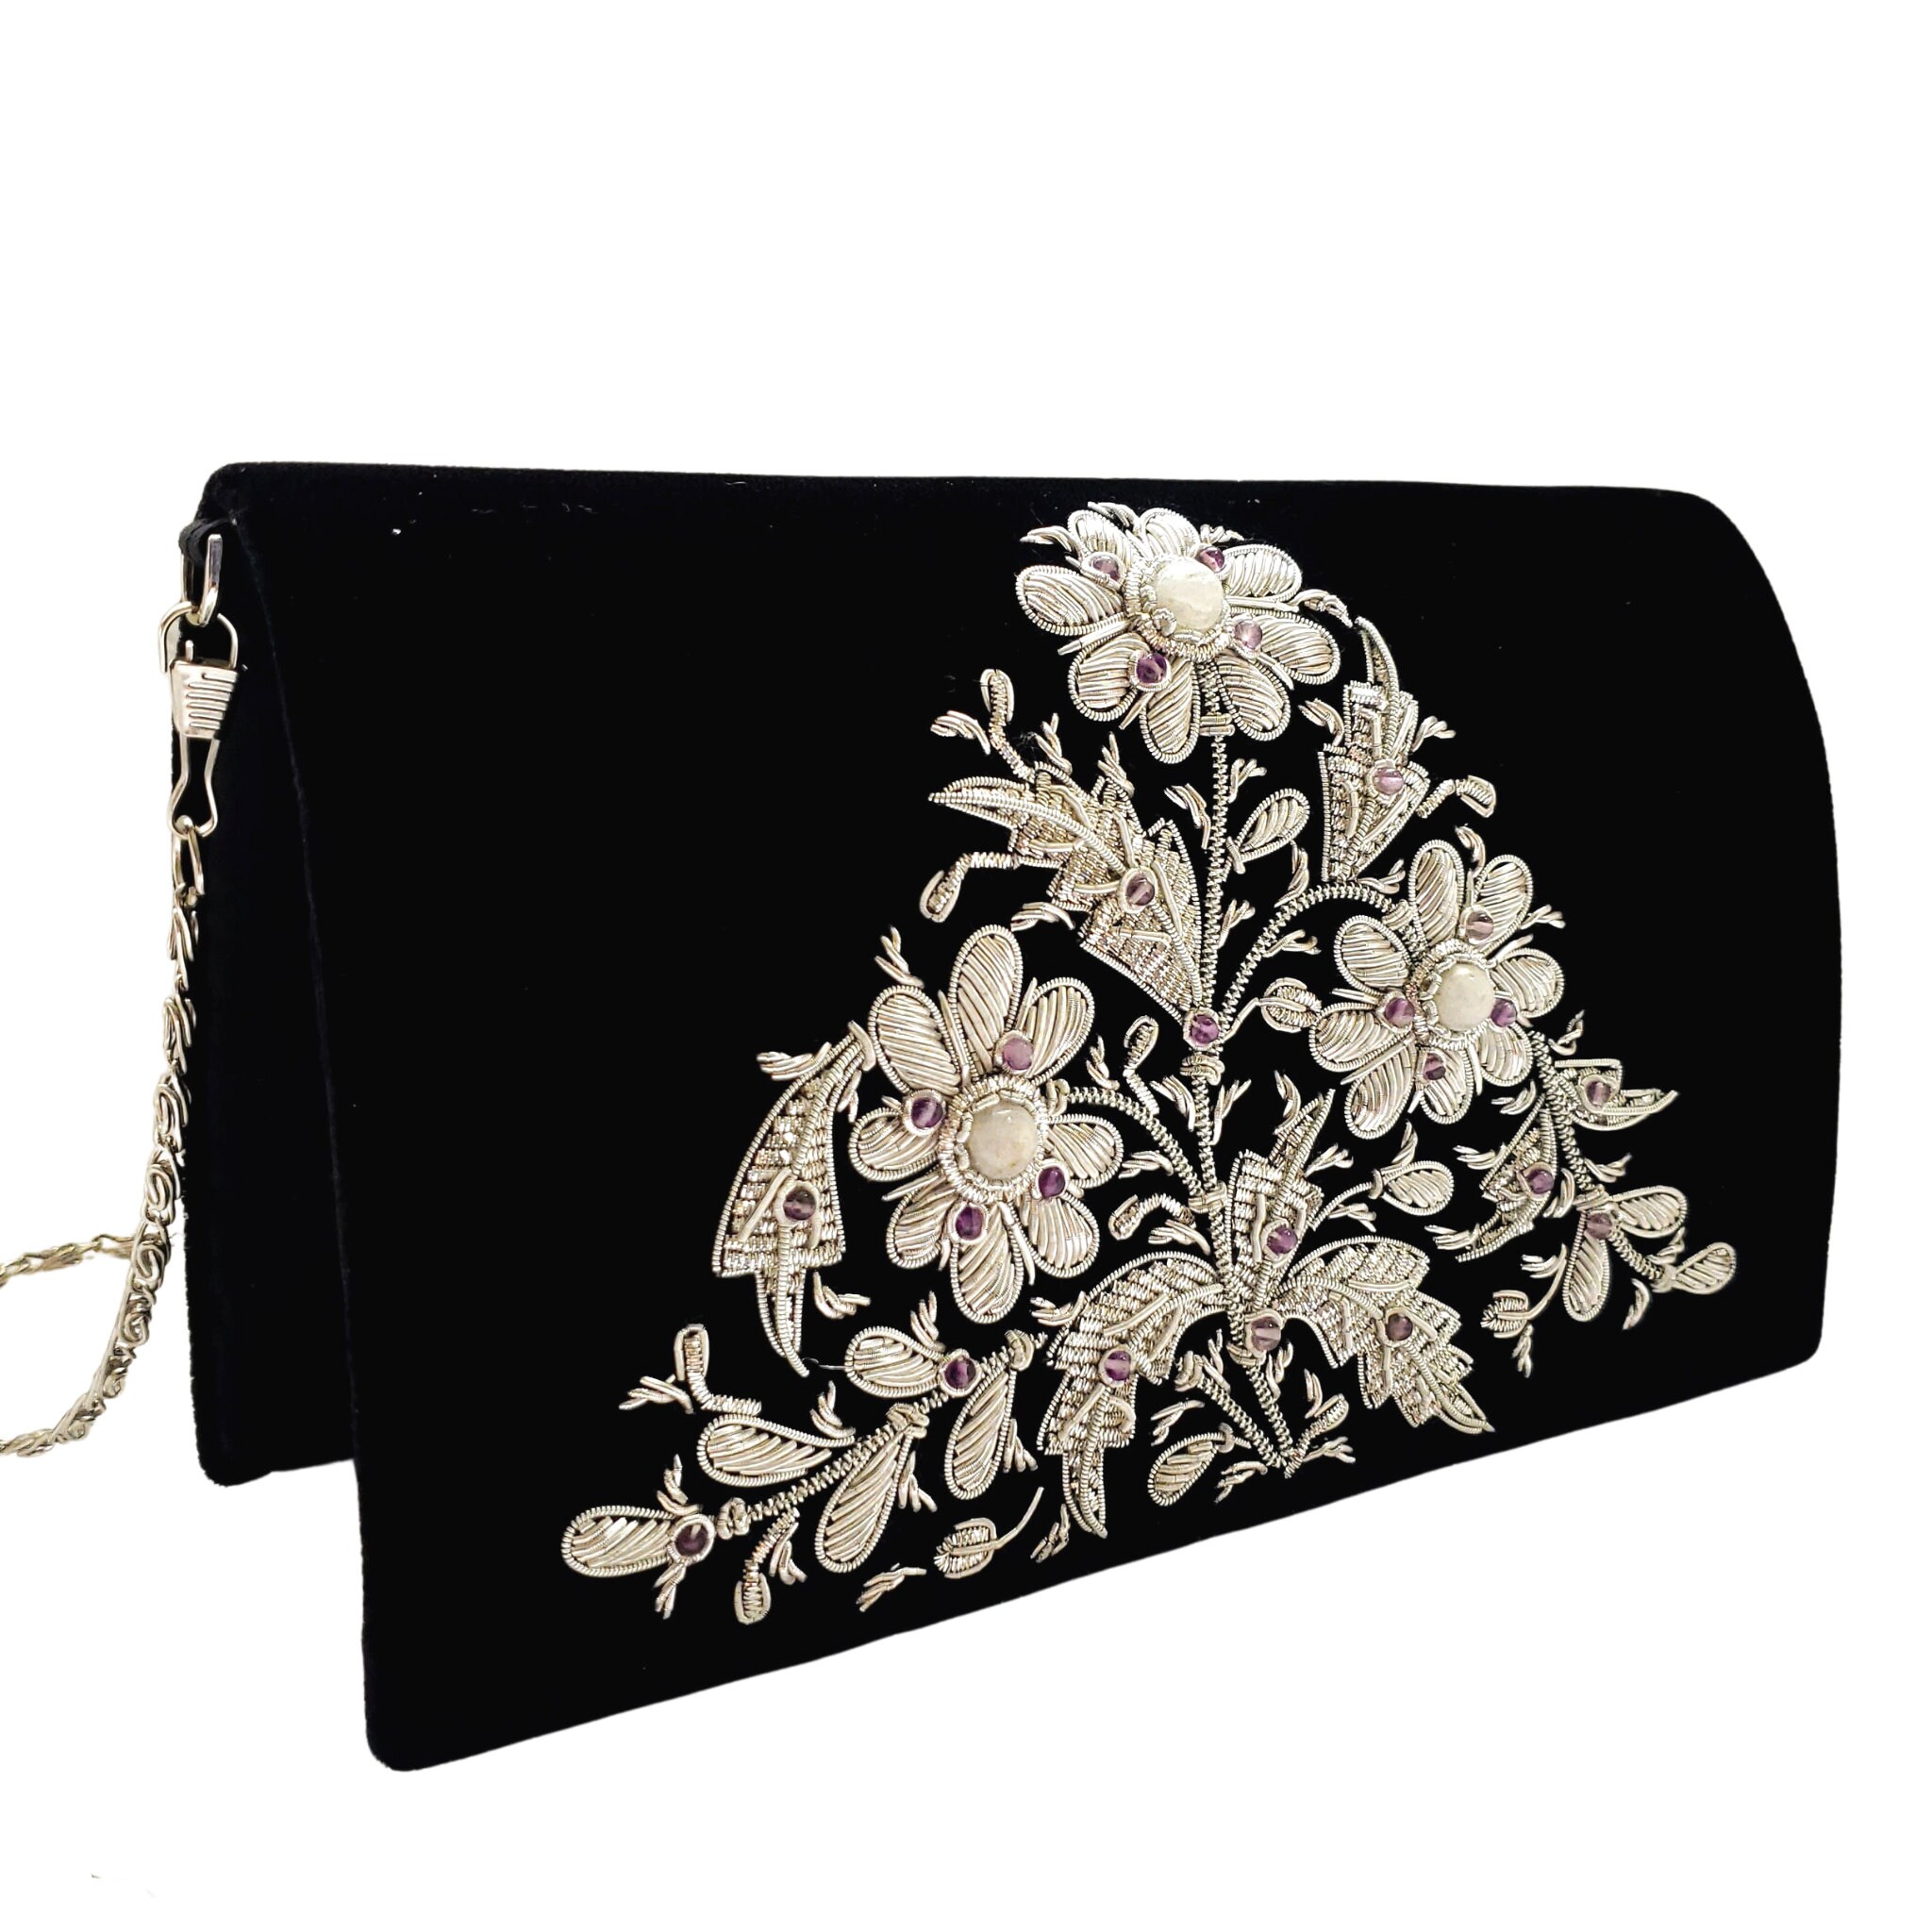 Velvet evening clutch bag embroidered with metallic flowers